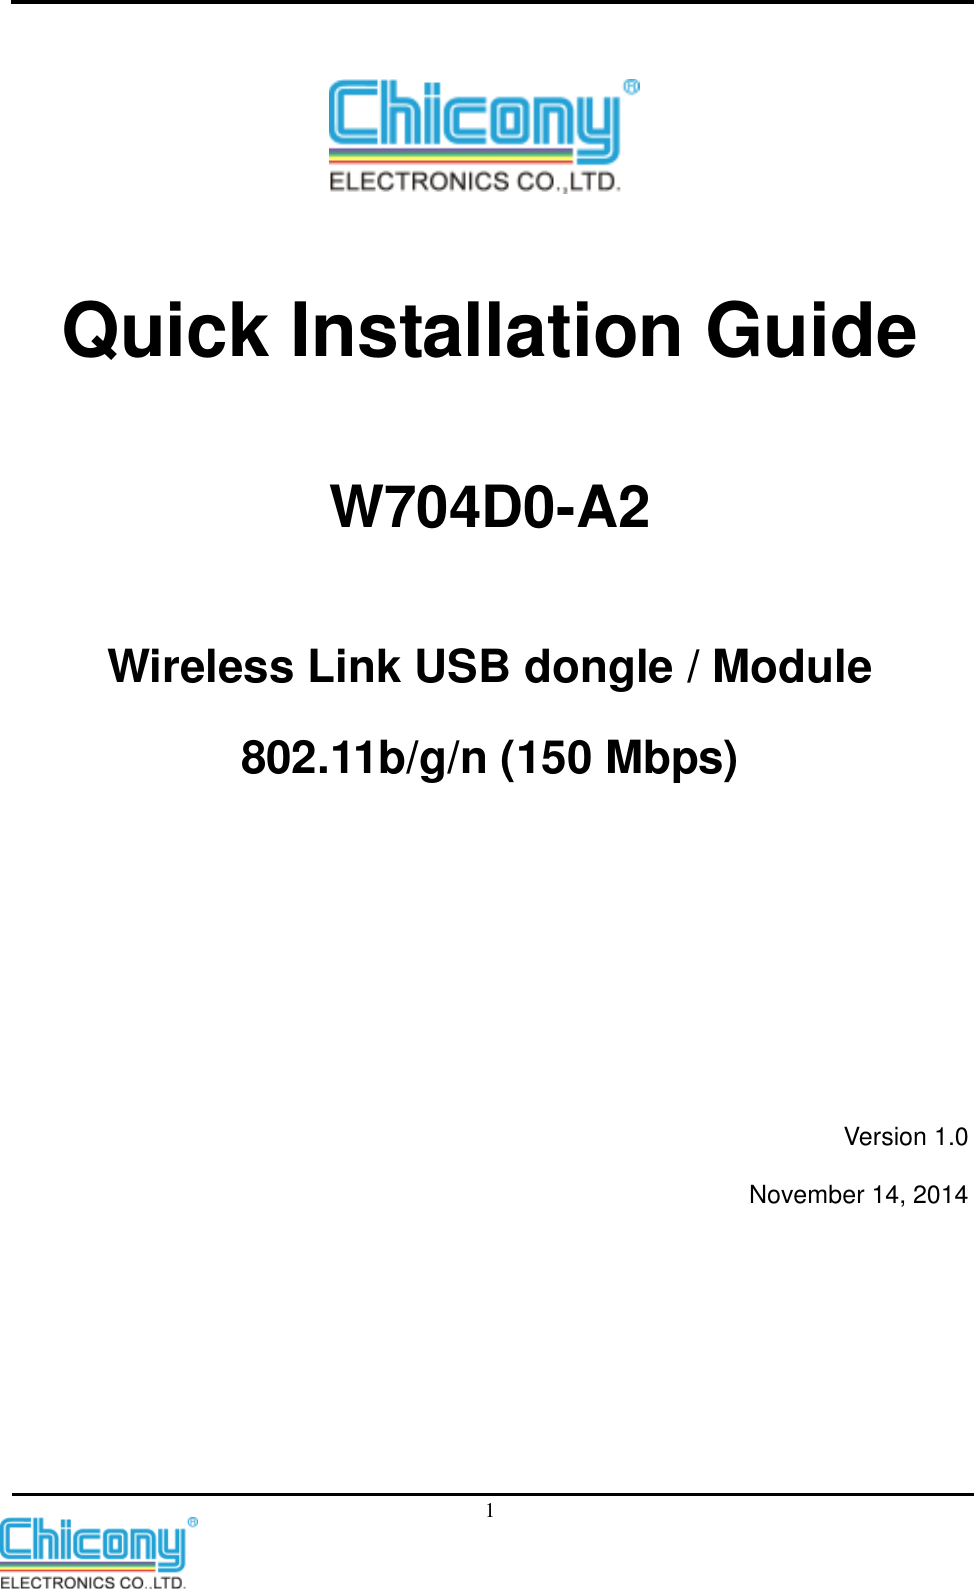    1  Quick Installation Guide W704D0-A2   Wireless Link USB dongle / Module 802.11b/g/n (150 Mbps)      Version 1.0 November 14, 2014 